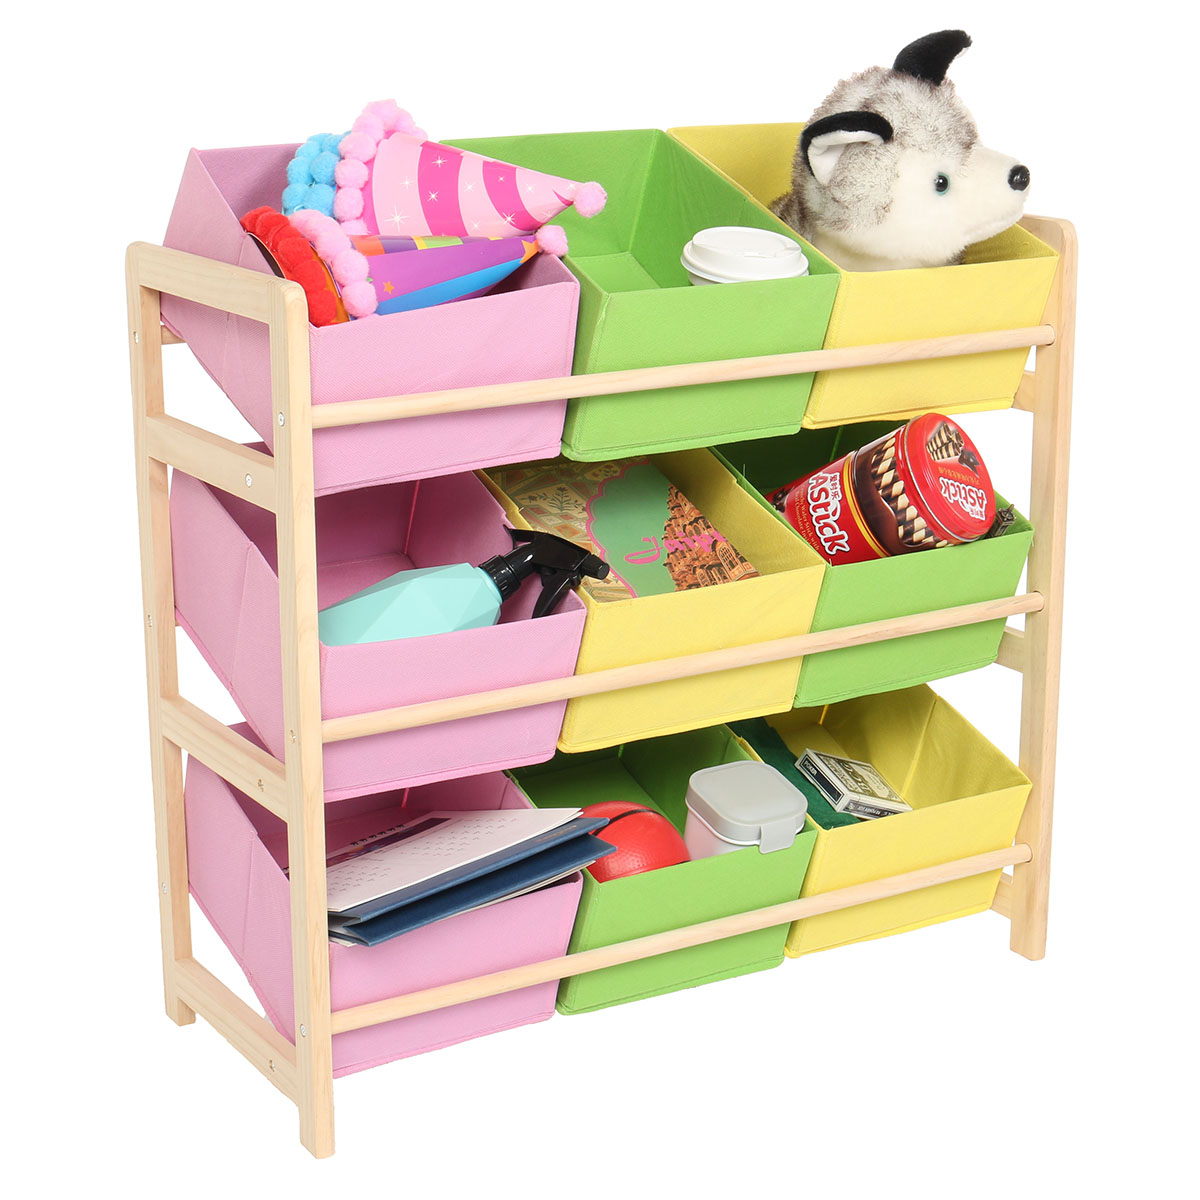 66309CM-Yellow-Pink-Green-Solid-Wood-Childrens-Toy-Rack-Storage-Rack-Toy-Rack-1754652-6